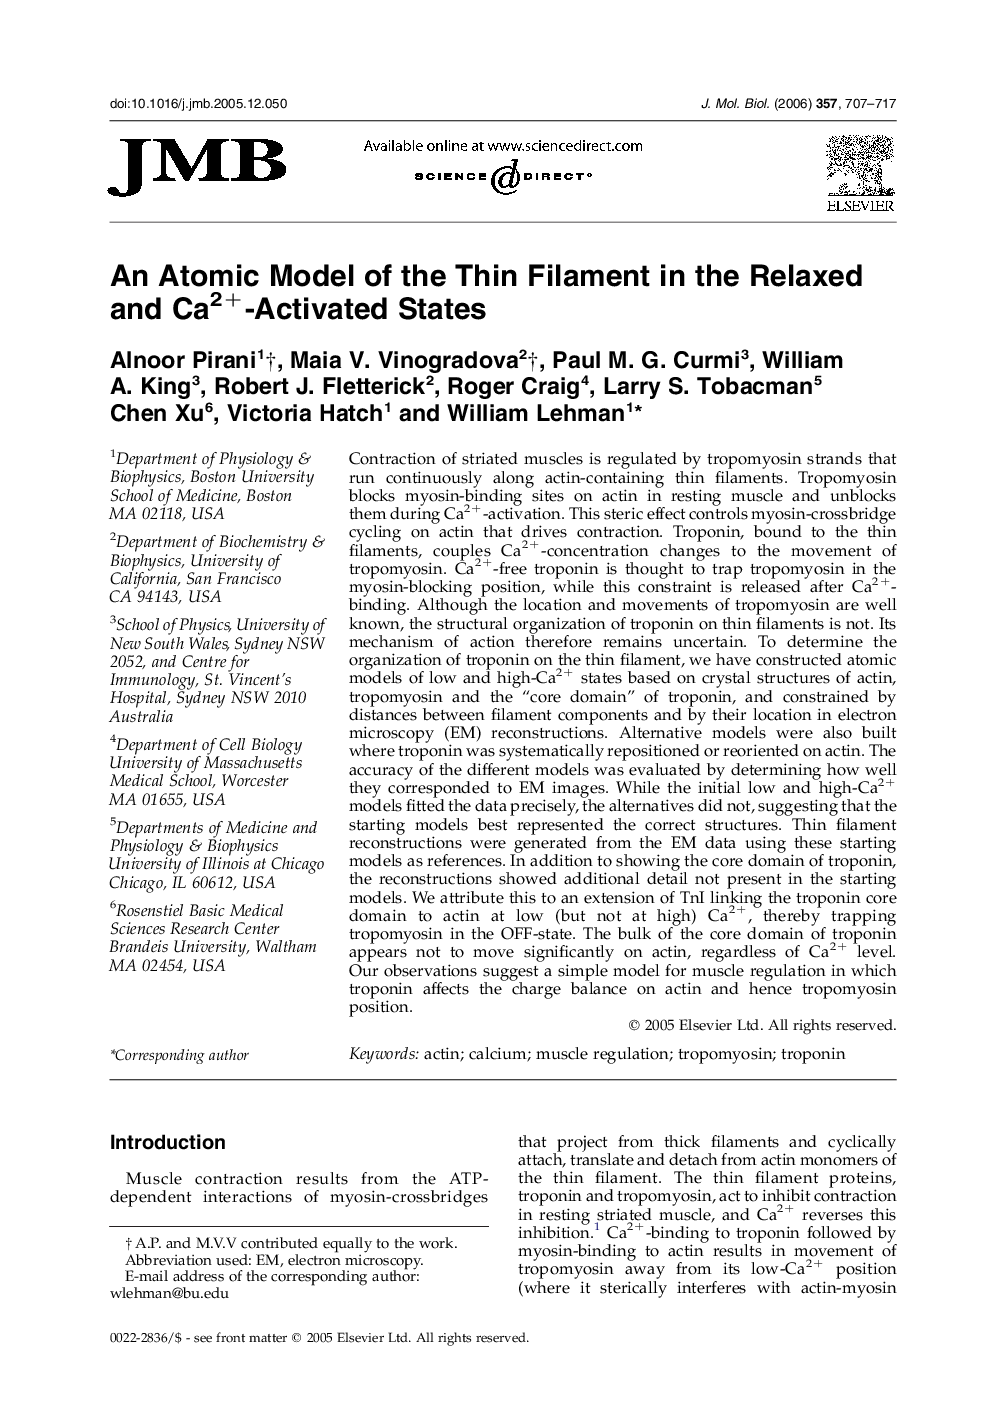 An Atomic Model of the Thin Filament in the Relaxed and Ca2+-Activated States